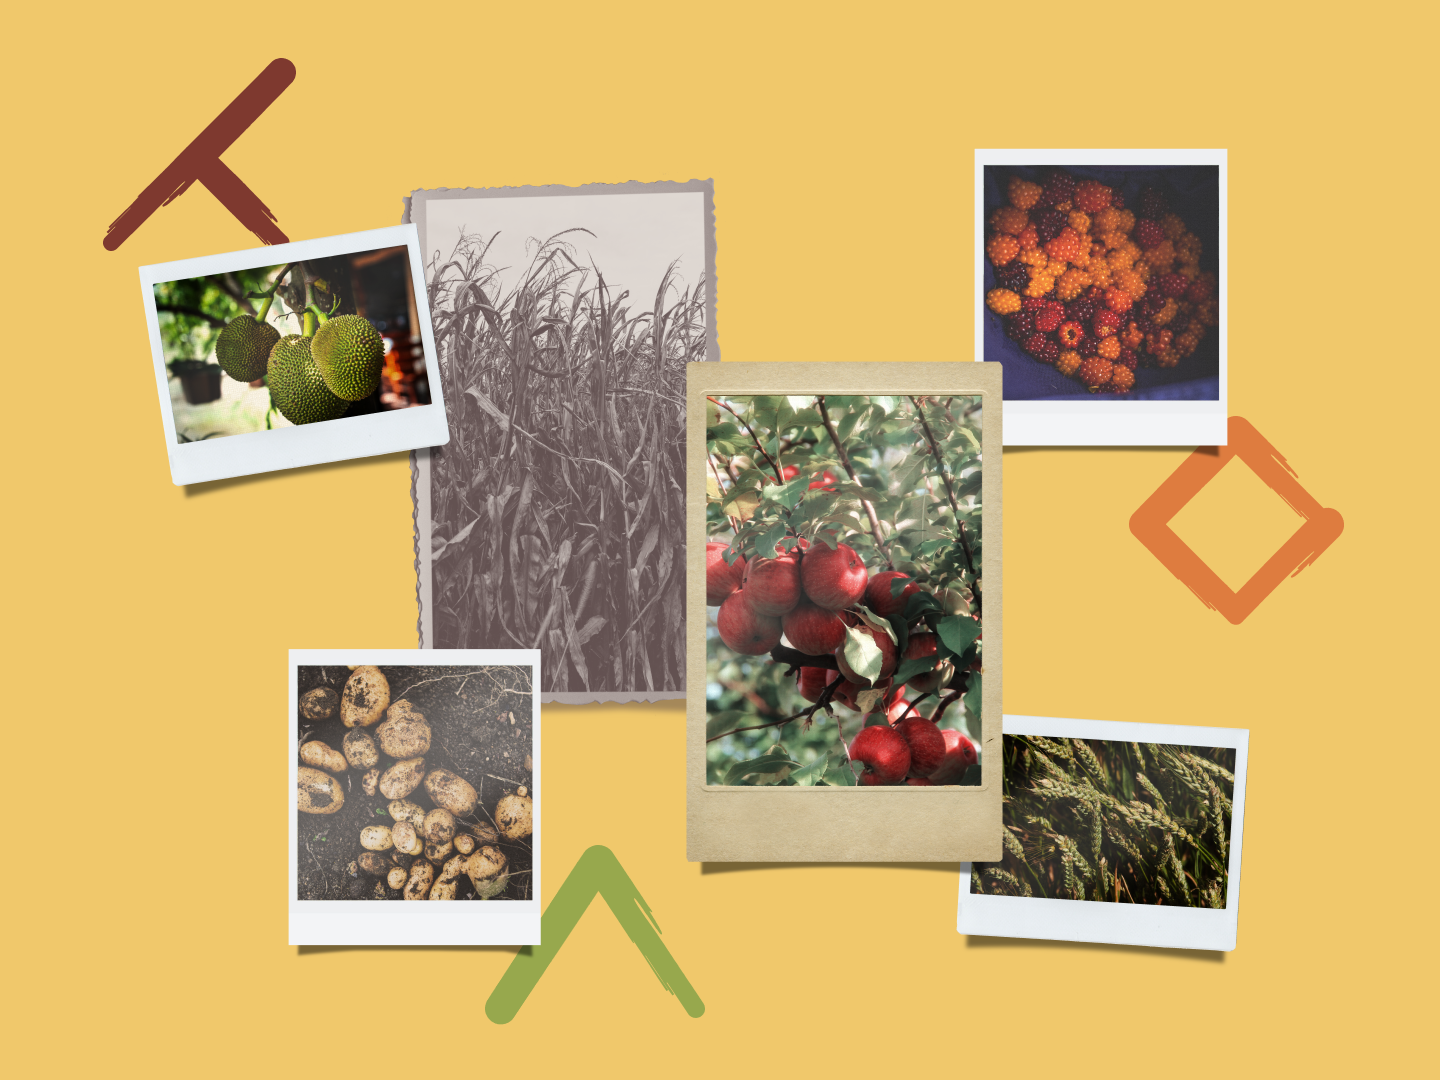 Collage of plants including breadfruit, wild berries, corn, apples, wheat, and potatoes.